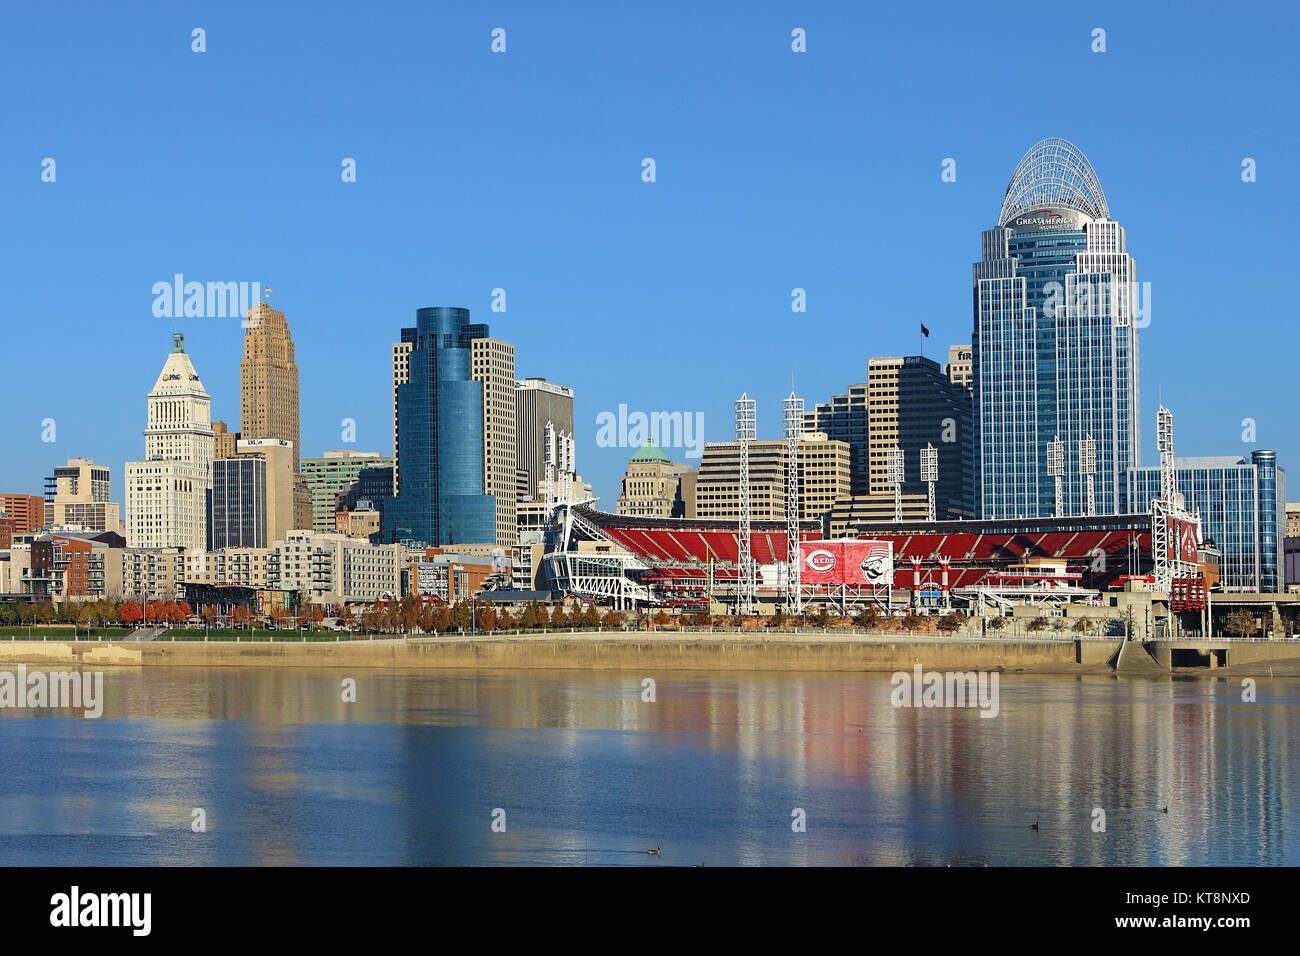 The Great American Ballpark in Cincinnati with Ohio River in foreground Stock Photo